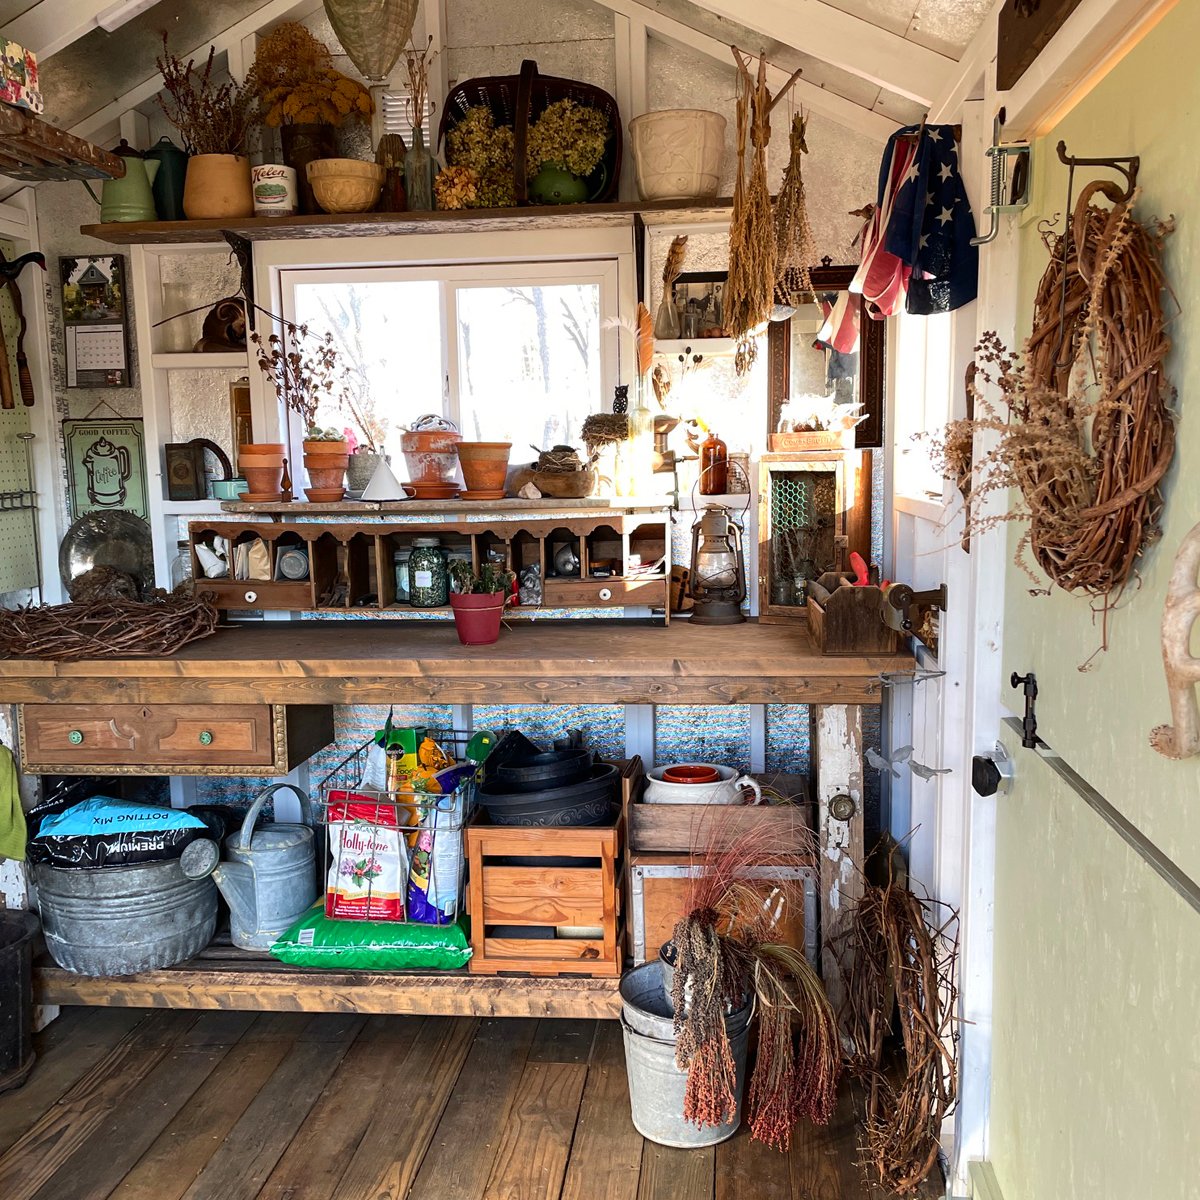 More details on the rustic potting bench for Rudy and Helen's garden shed.